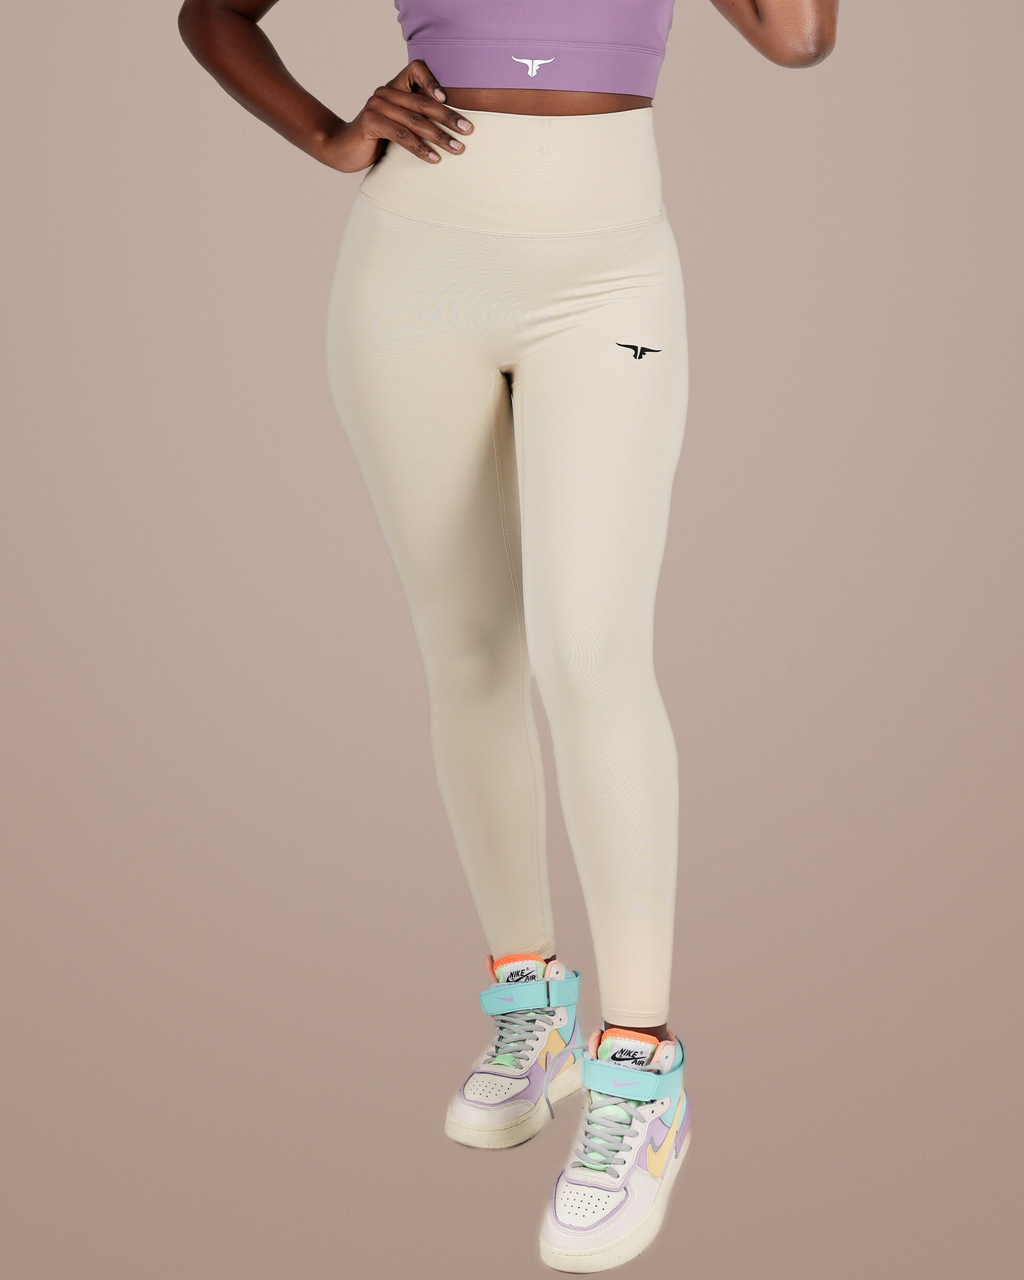 THUGFIT FunkyHues Performance-Stride Fitness Leggings -Grey